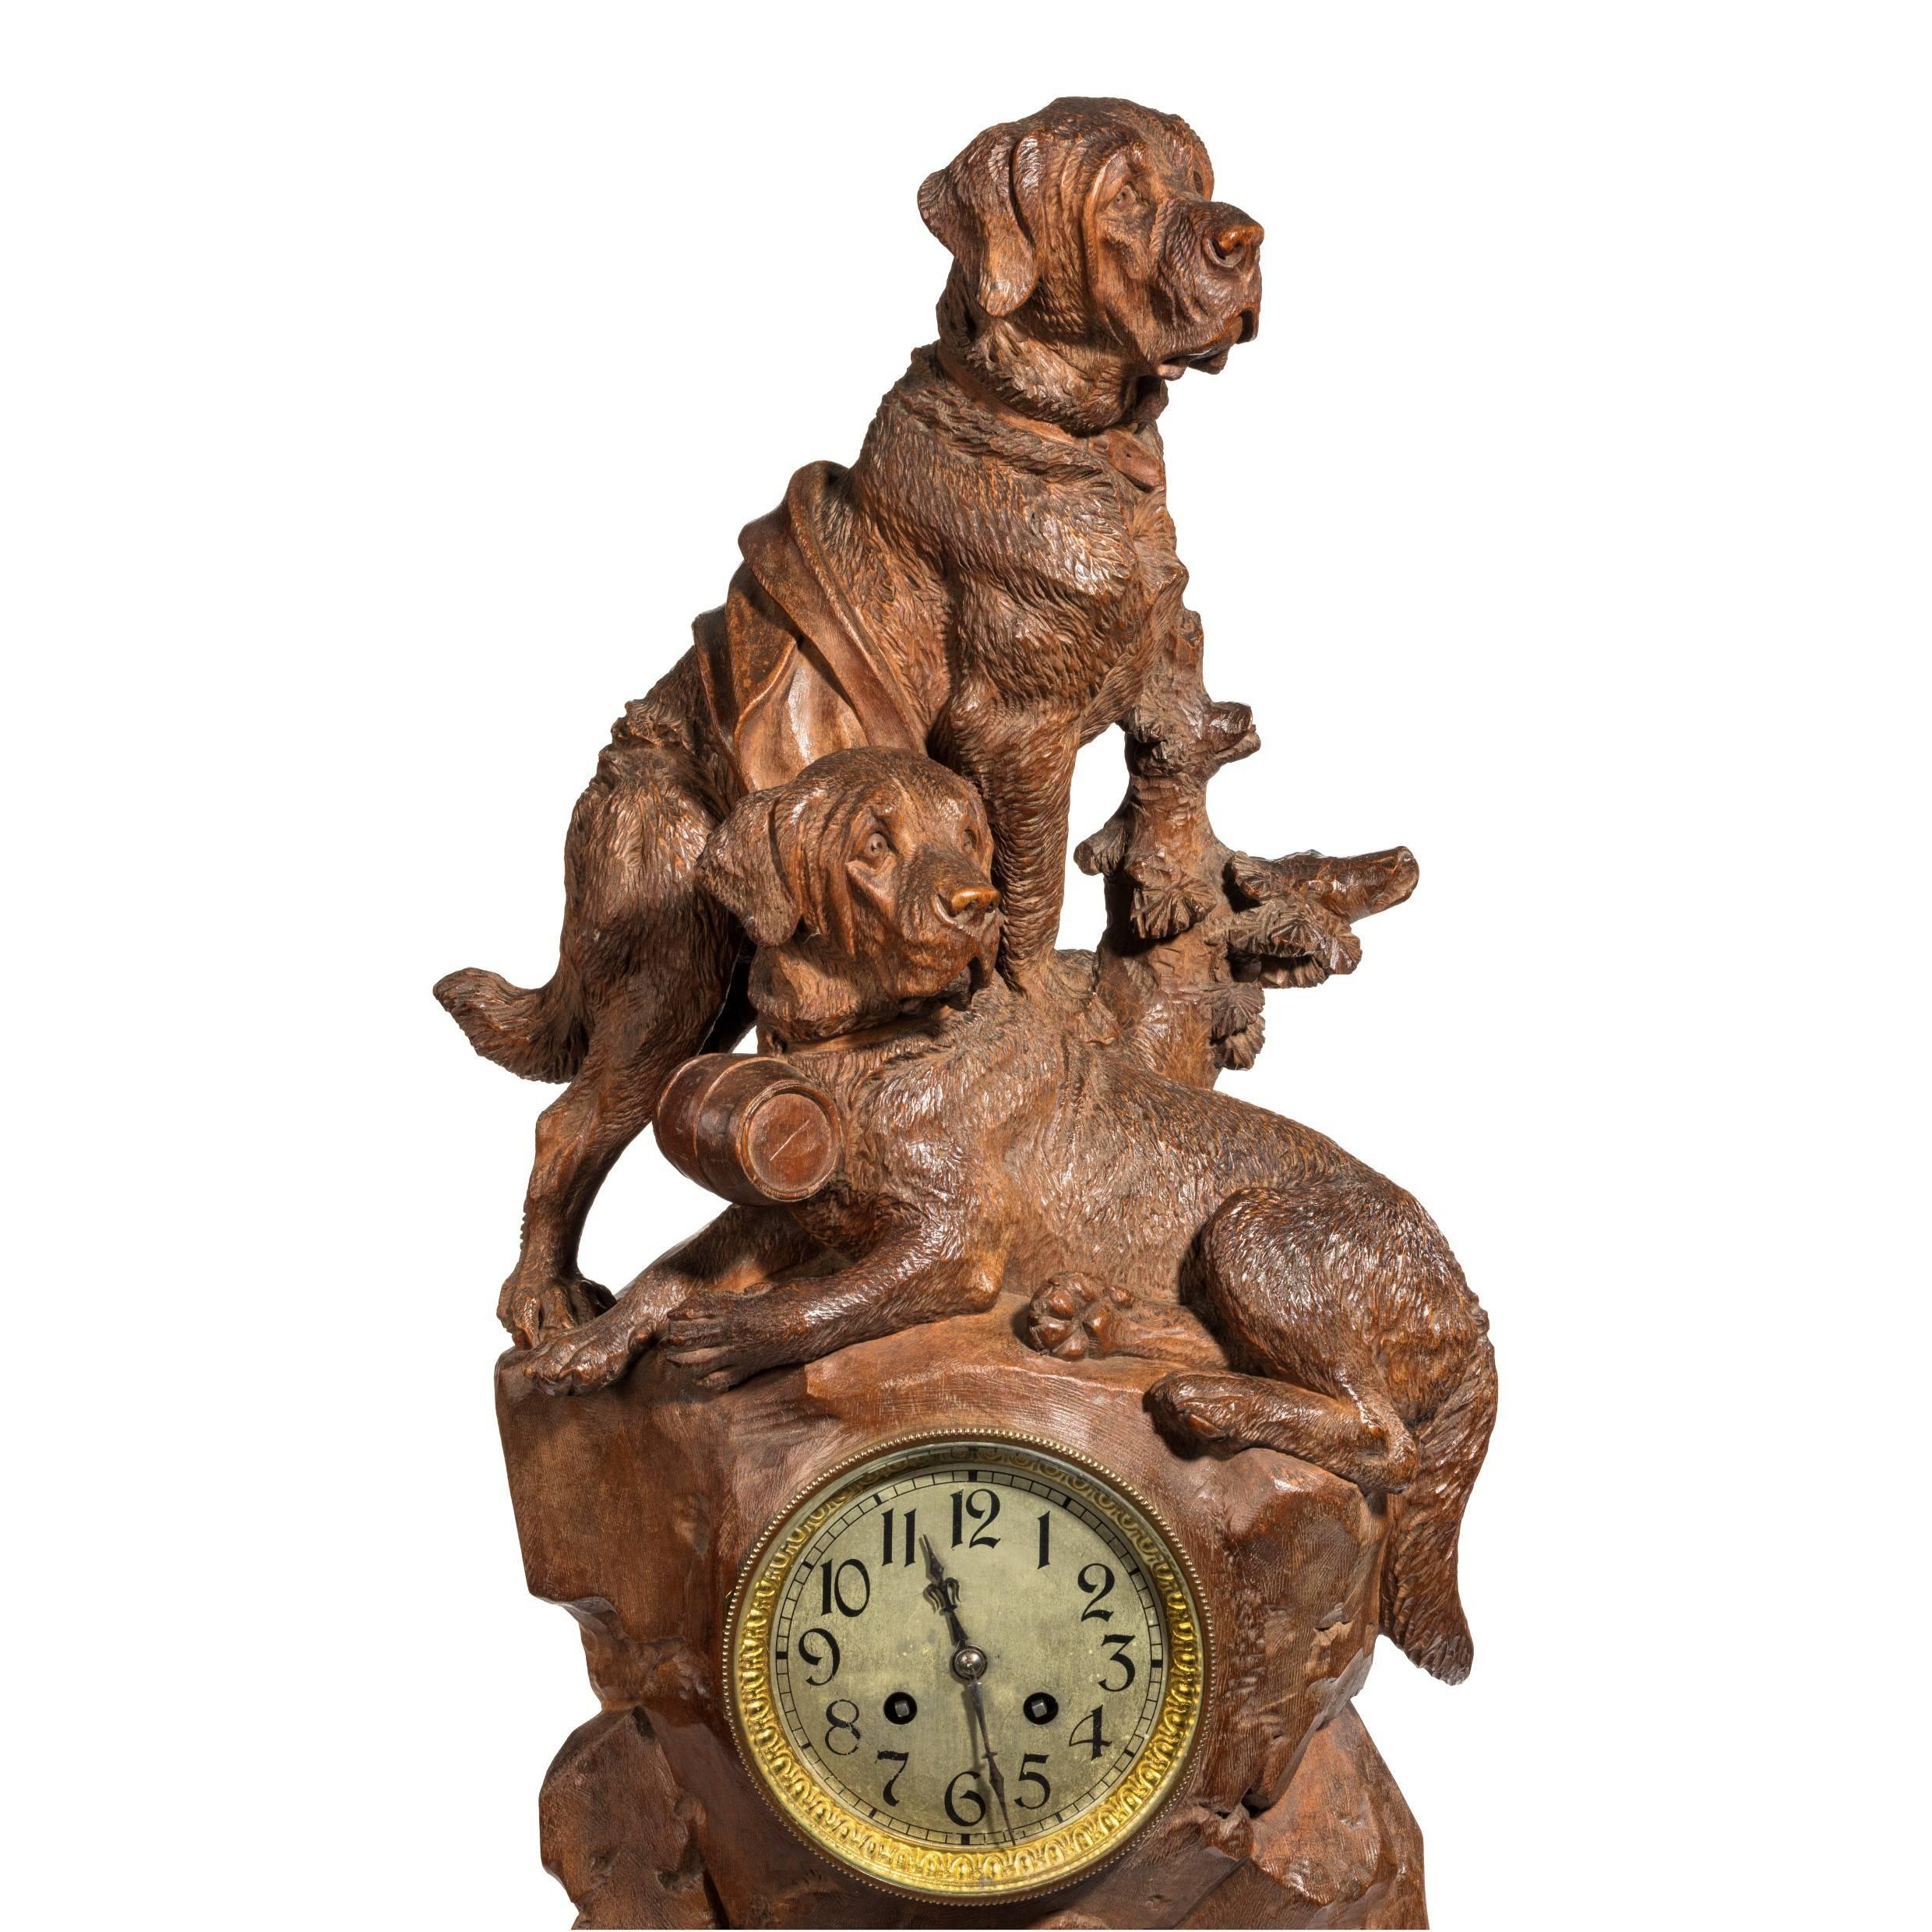 A very attractive walnut 'Black Forest' clock with mountain rescue dogs, 

The clock set into a rocky outcrop surmounted by a pair of dogs, one wearing a collar with a barrel.